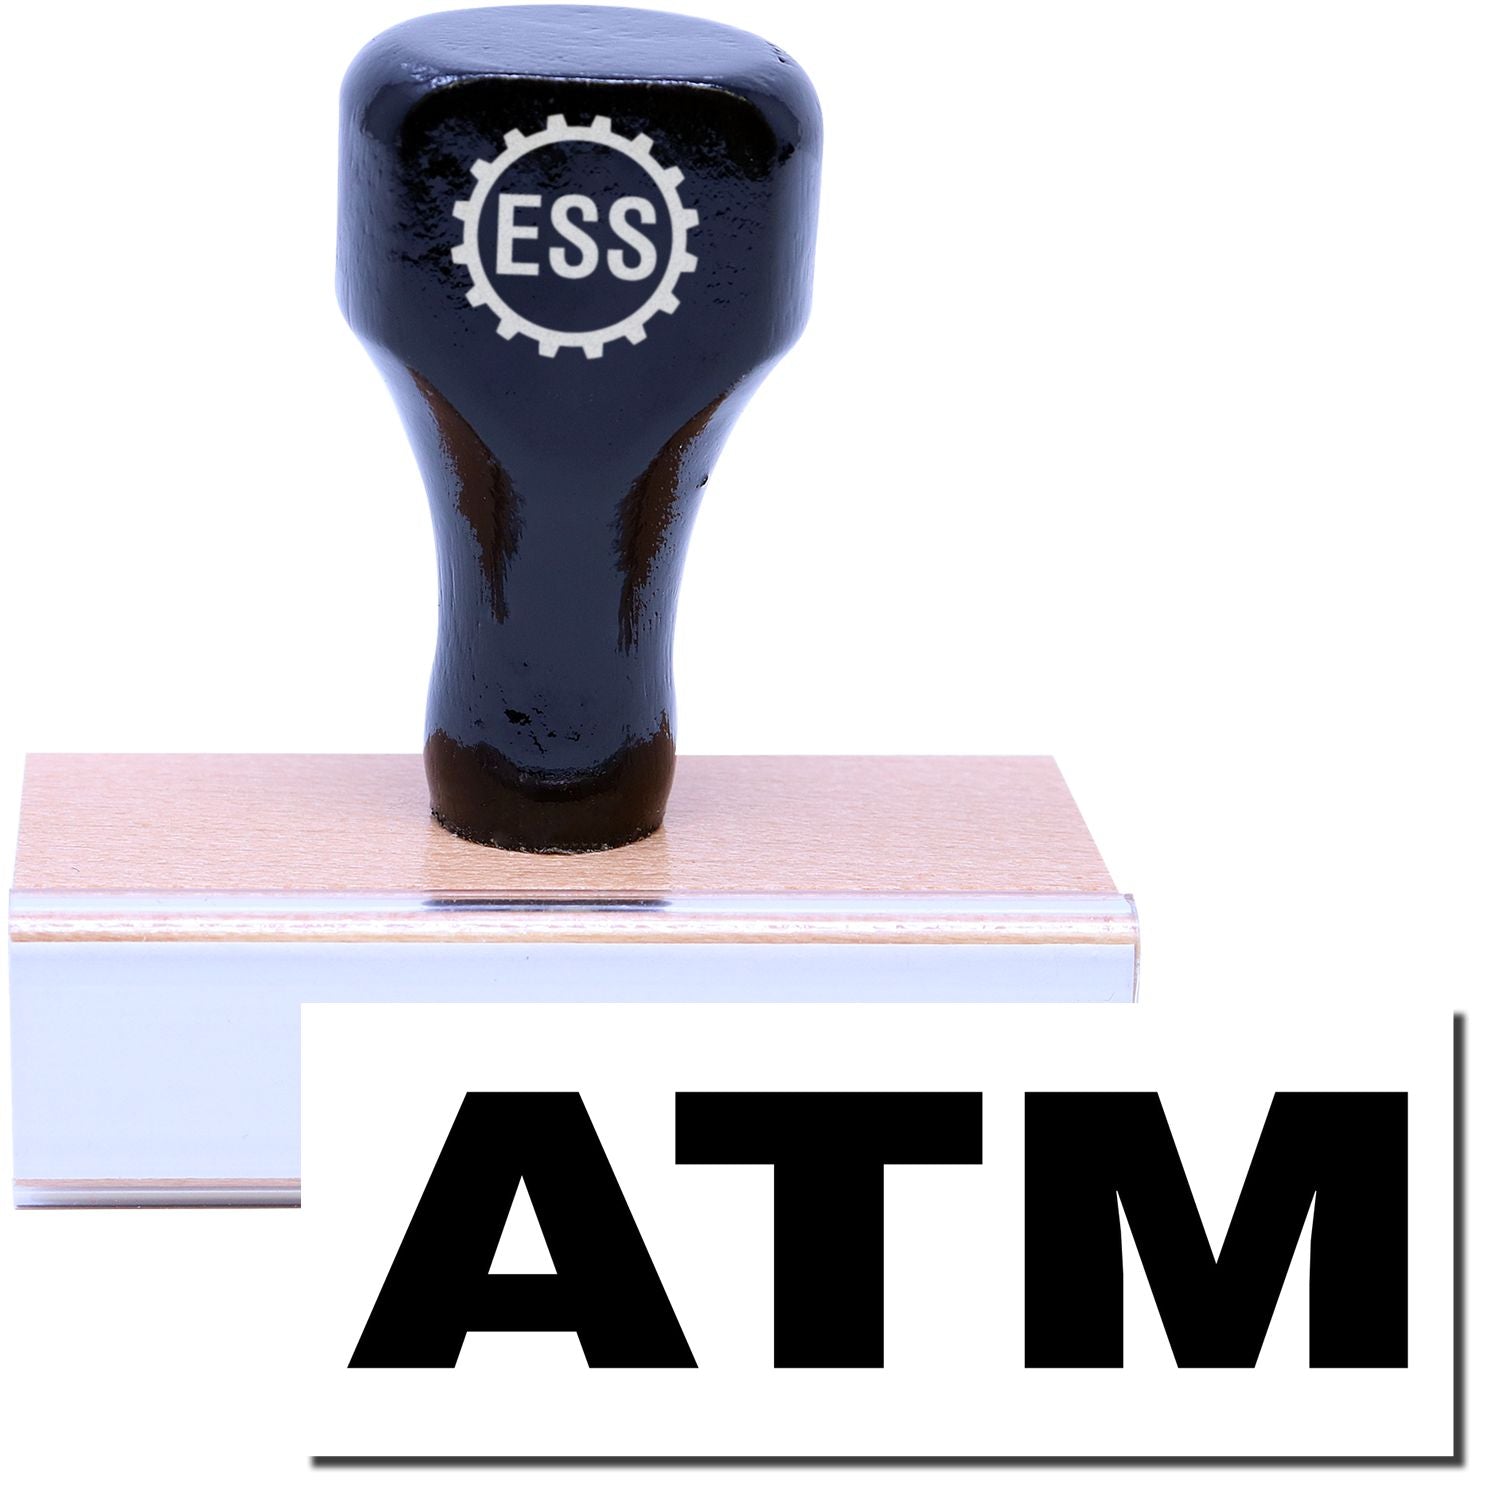 A stock office rubber stamp with a stamped image showing how the text "ATM" is displayed after stamping.